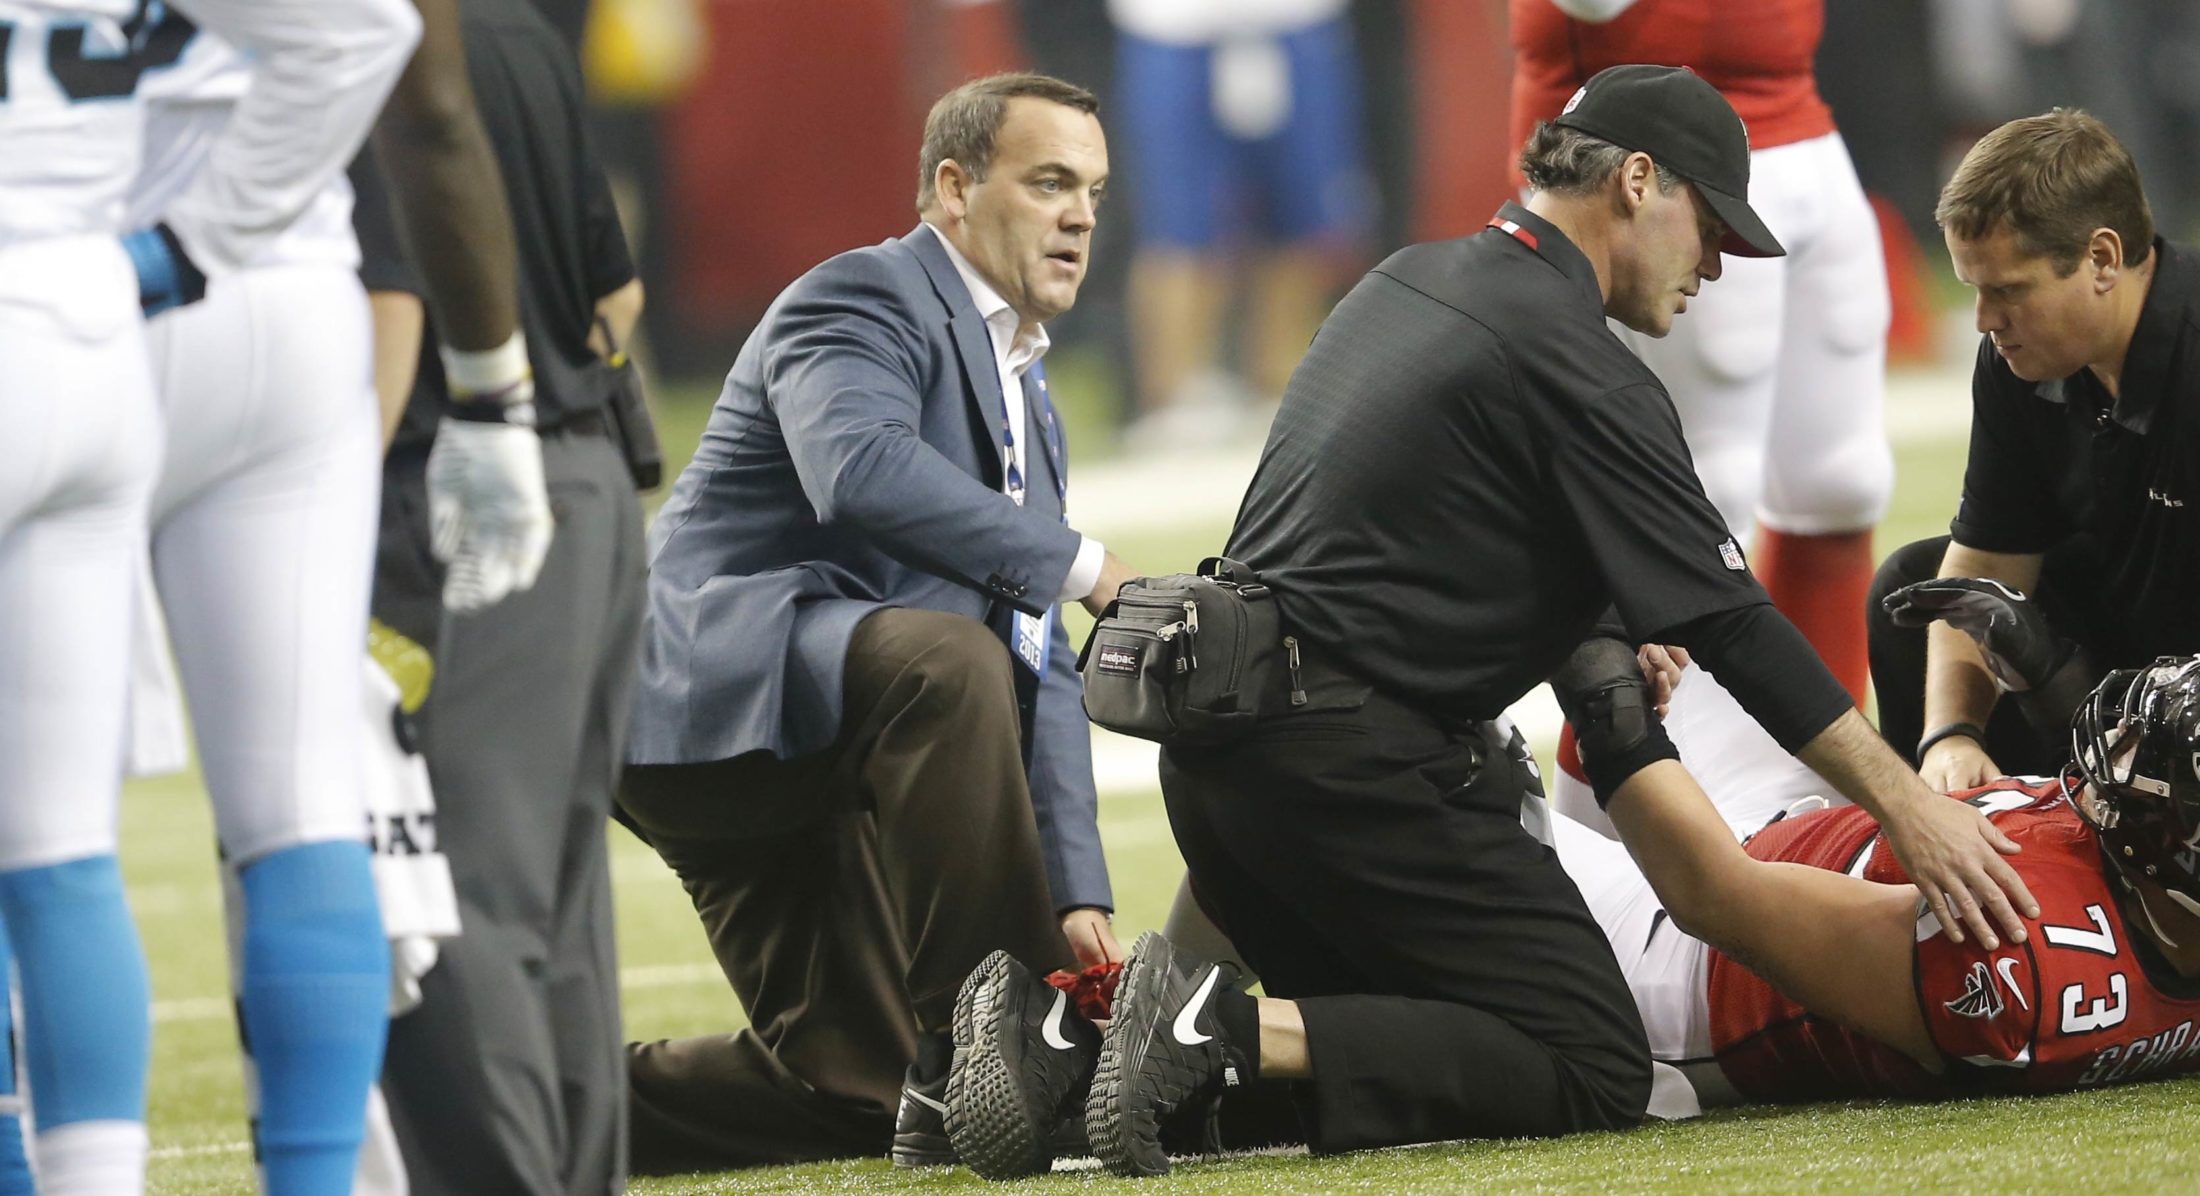 Dr. Spero Karas, one of America's top sports medicine specialists on the field with injured Atlanta Falcons player